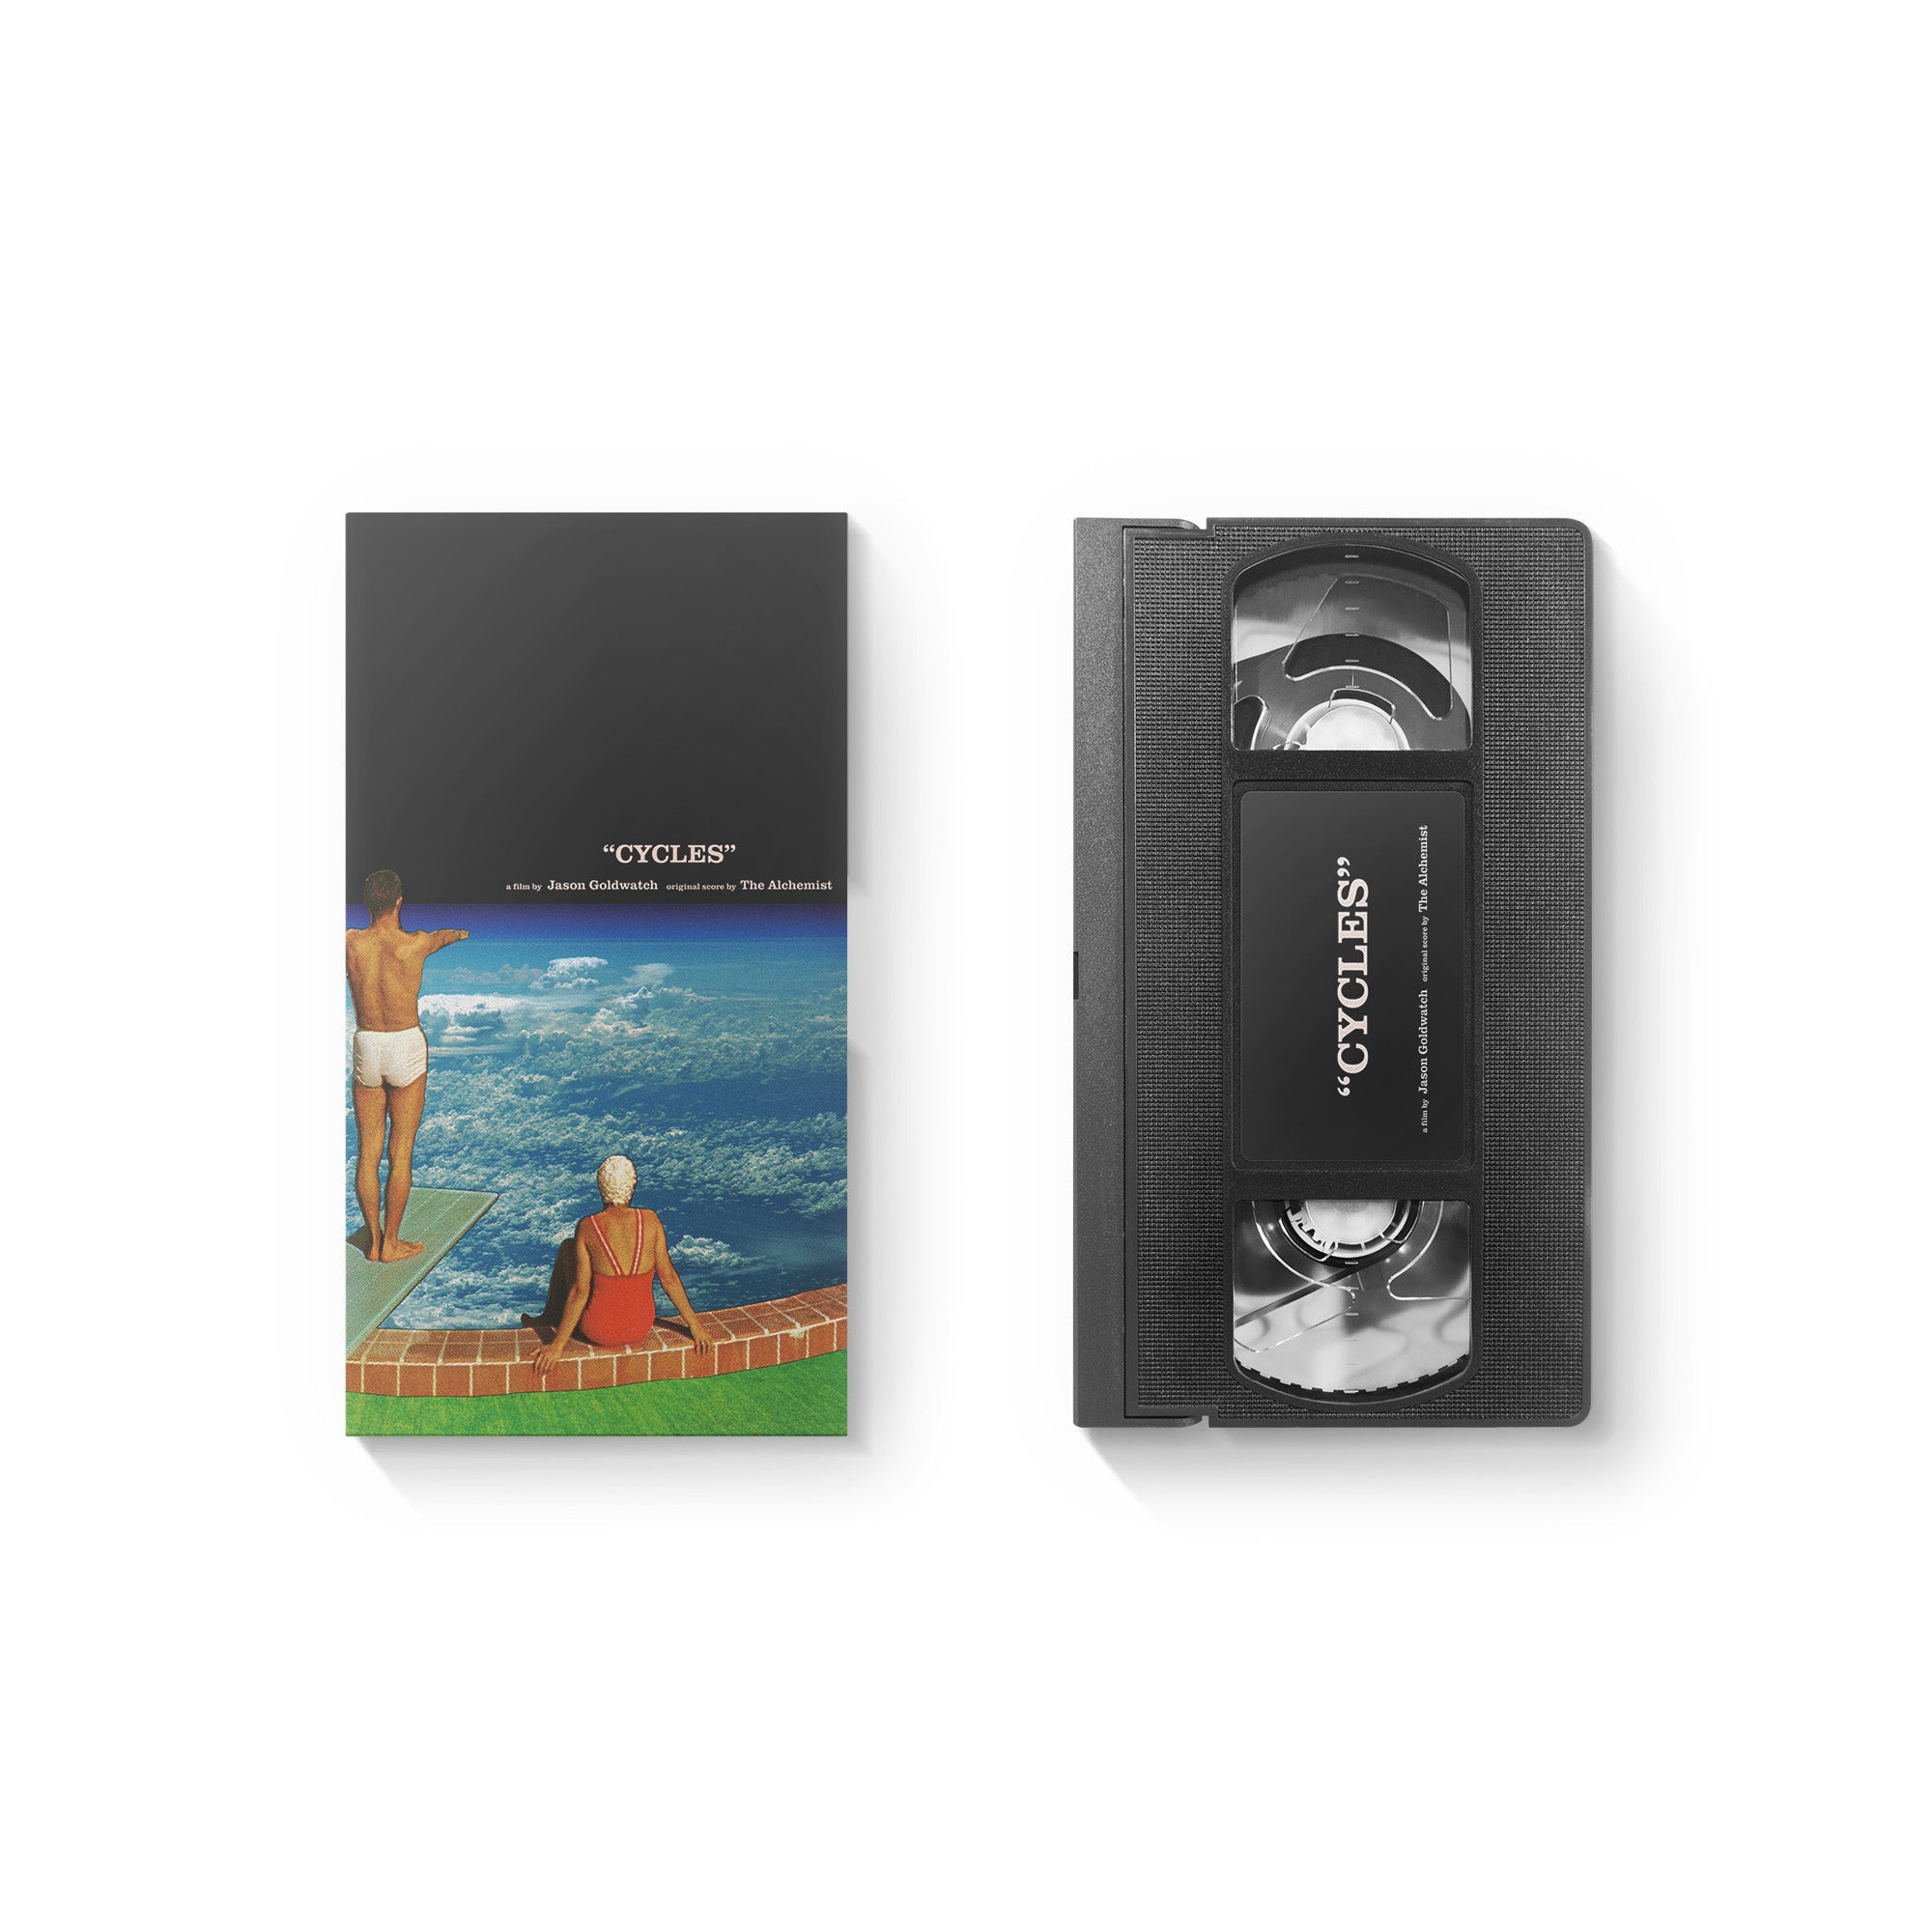 Cycles (VHS Tape)